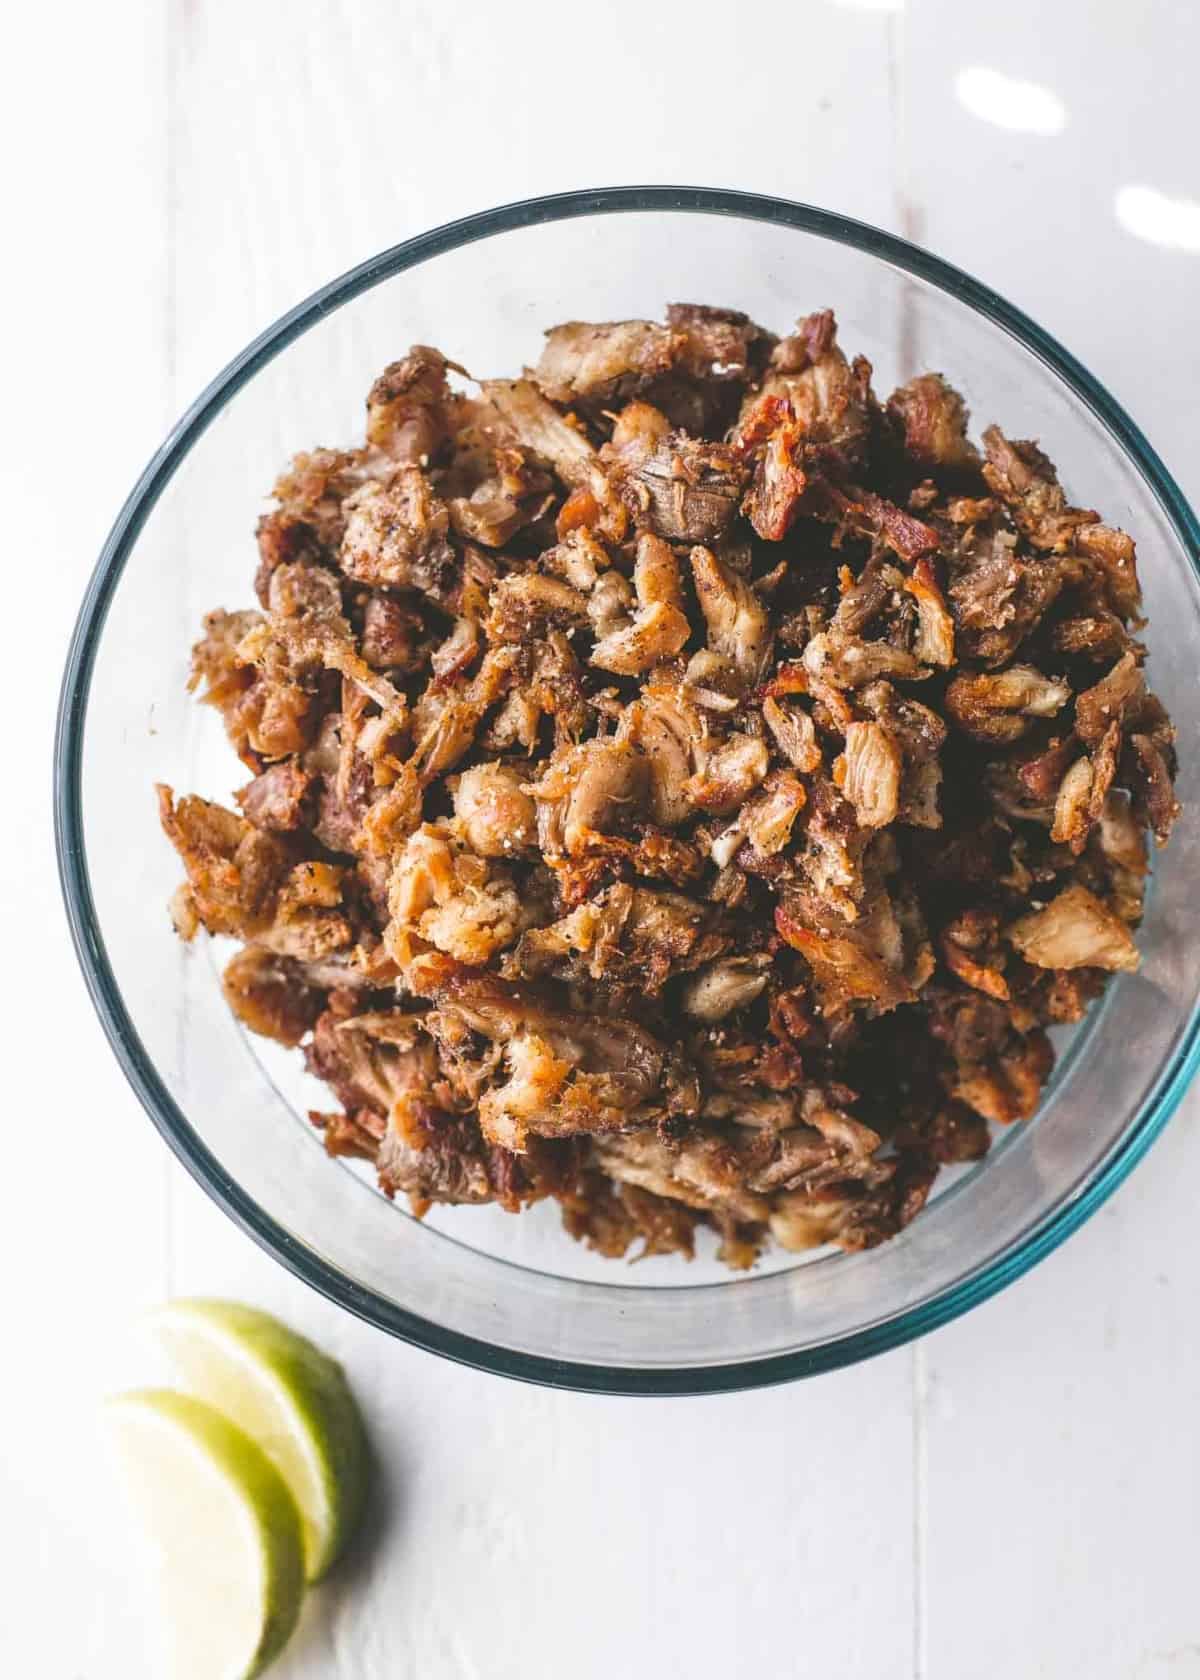 Slow cooker chicken carnitas in a clear glass bowl